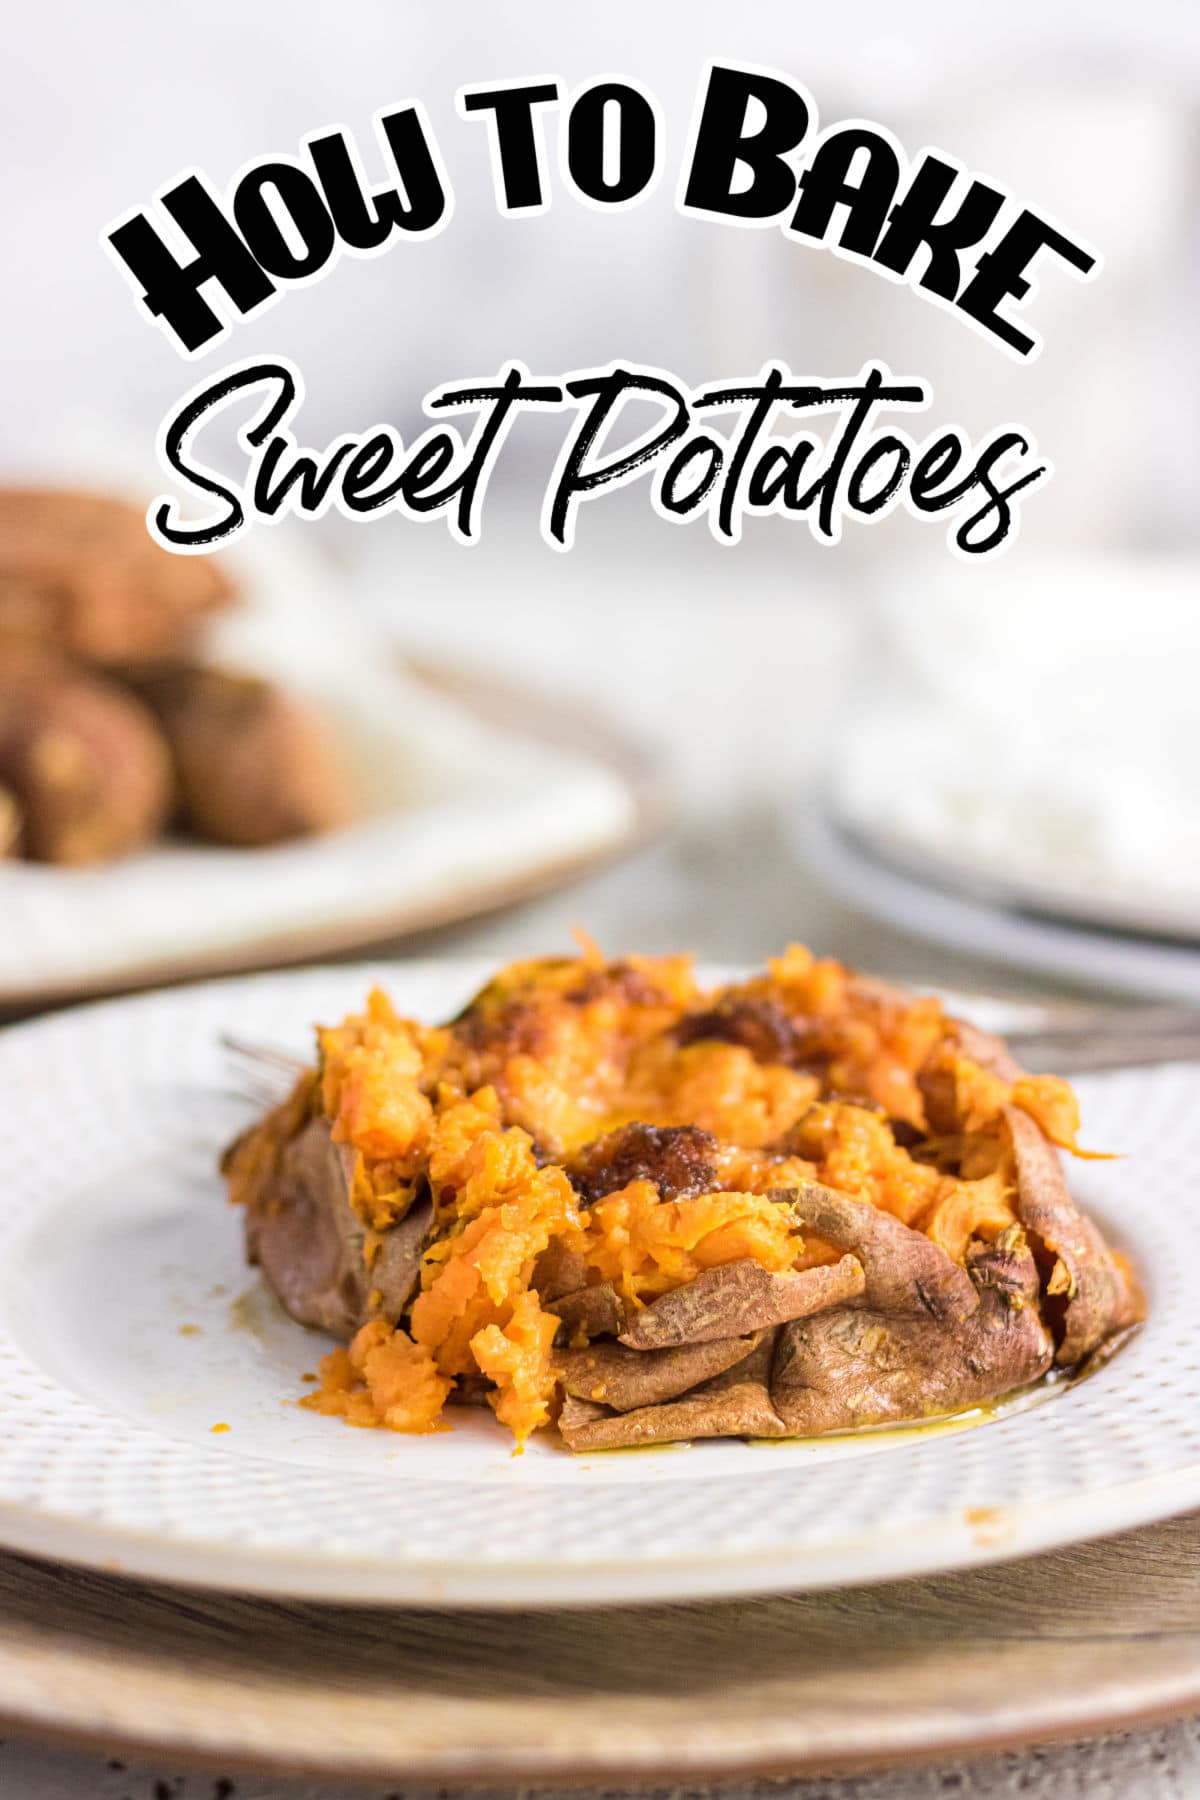 Baked sweet potato on a white plate.